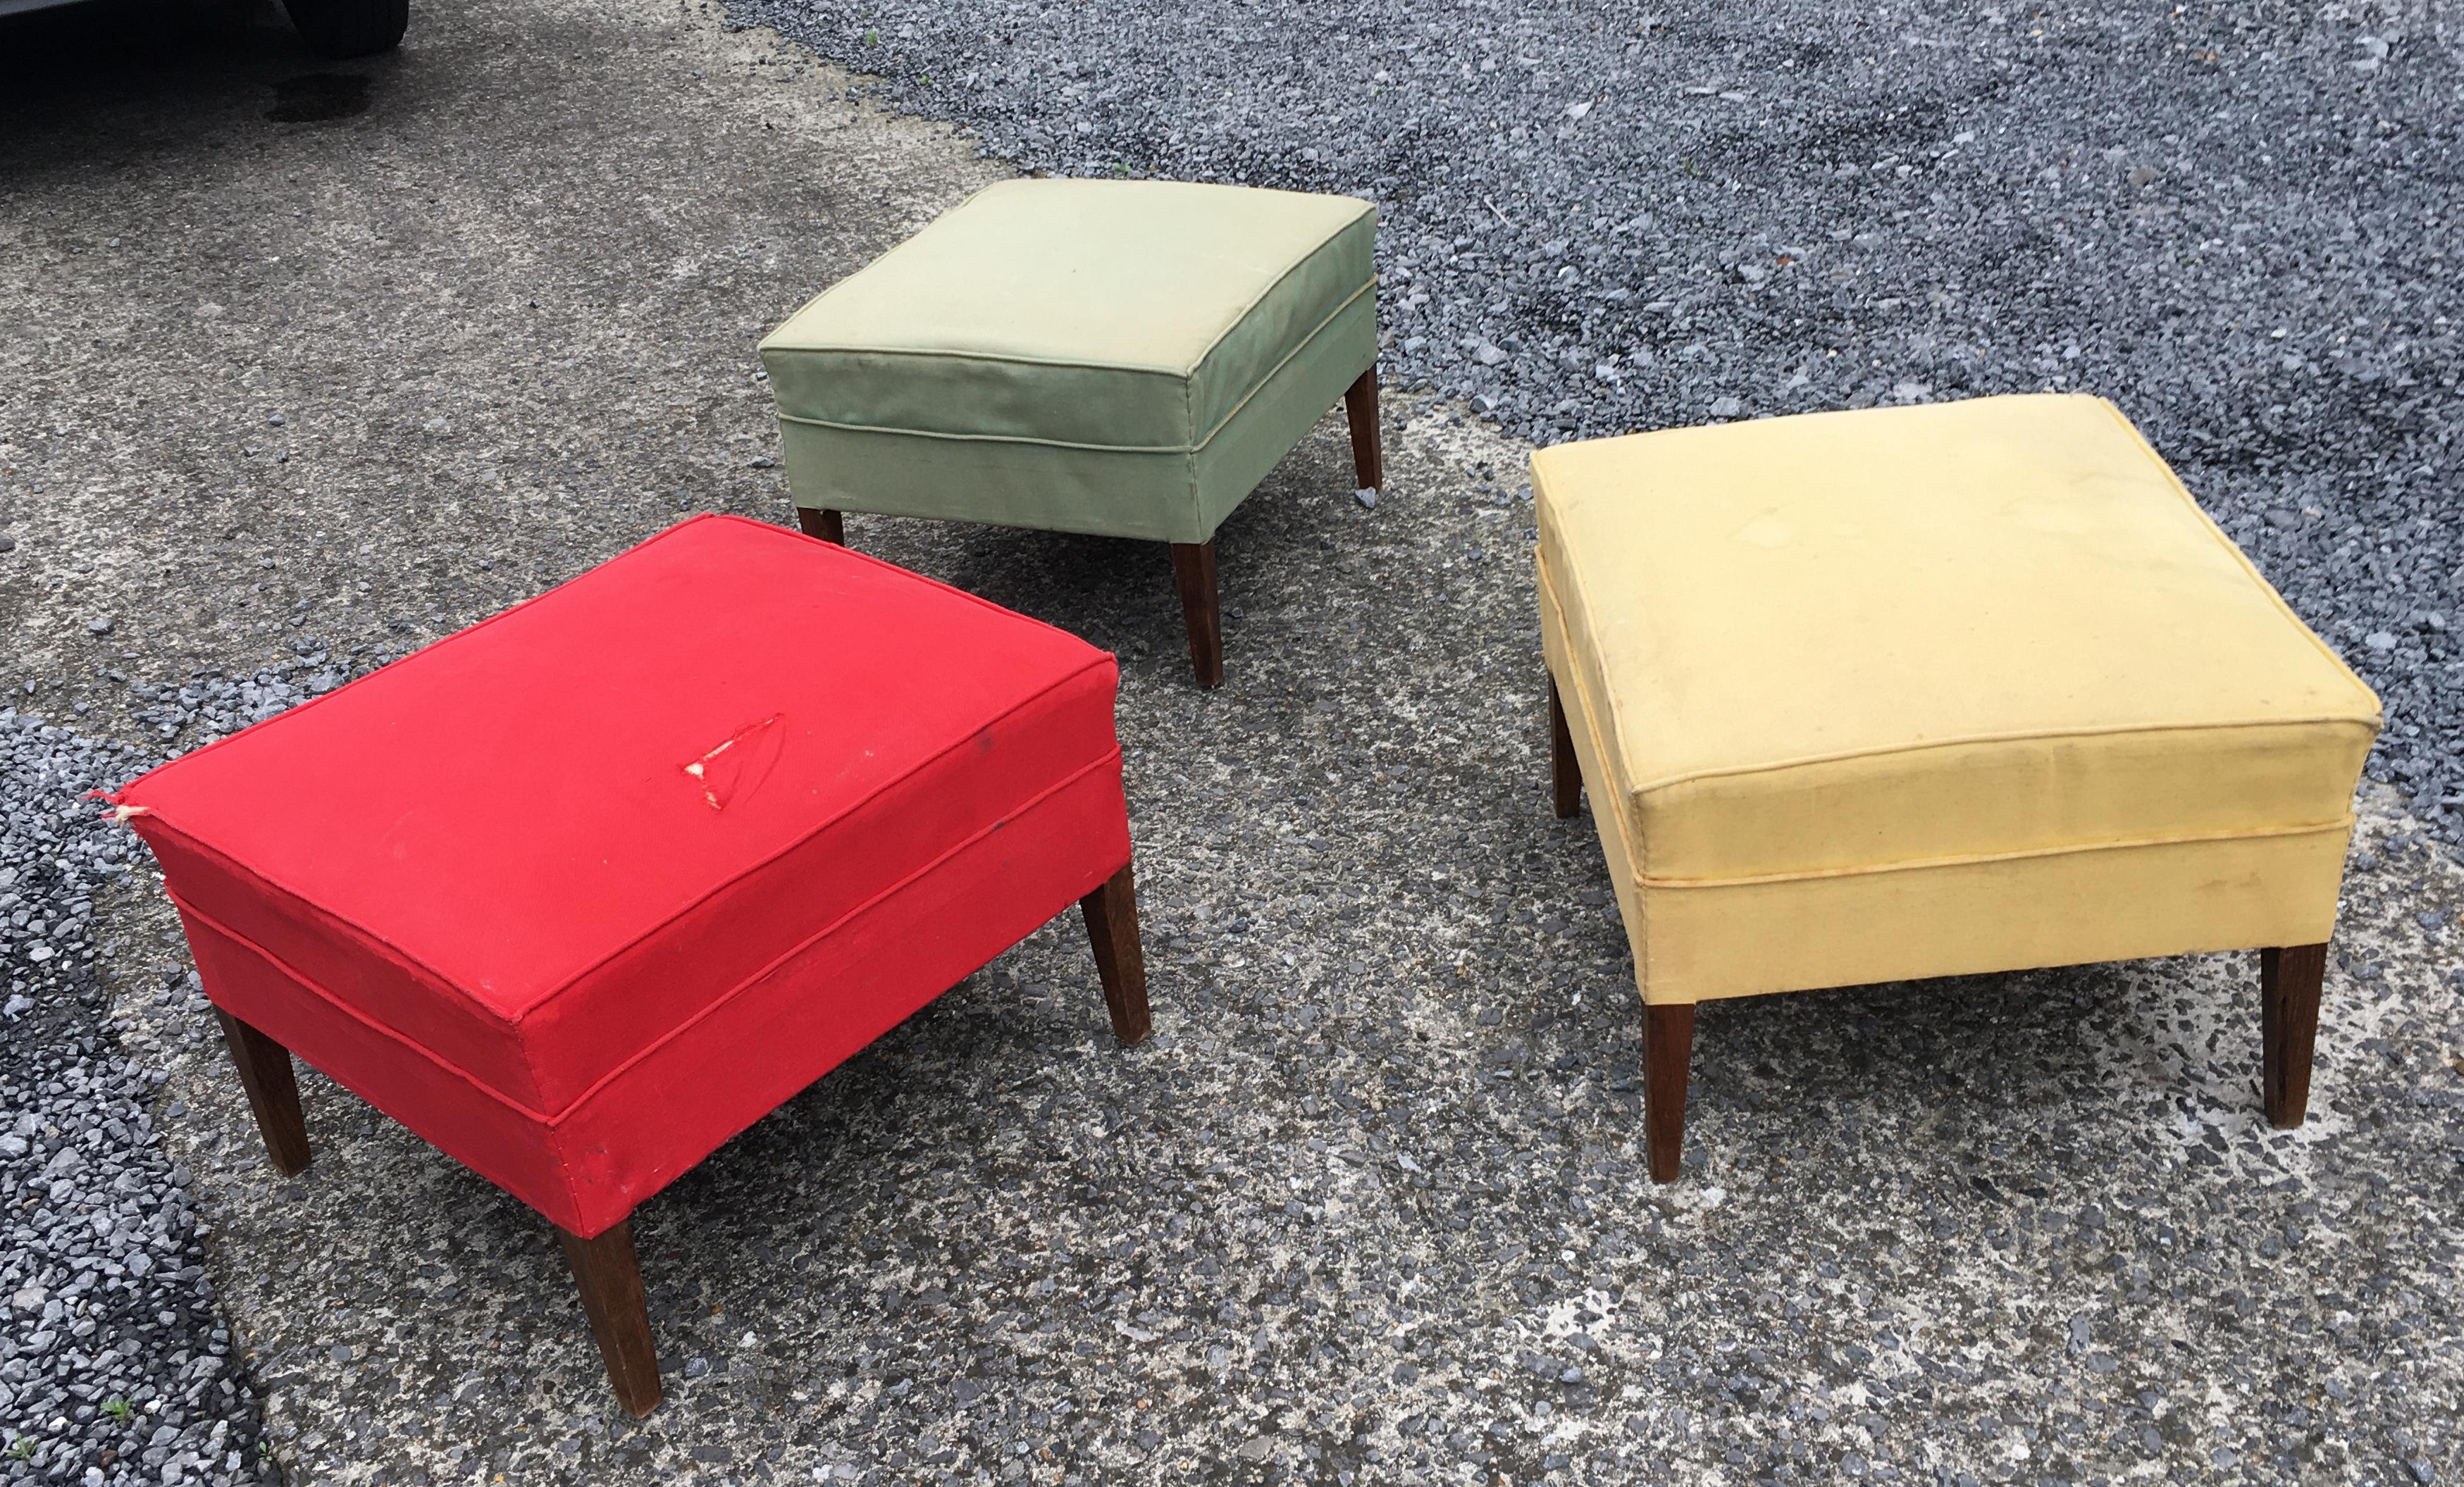 3 stools from the French reconstruction period, circa 1950
fabric to change.